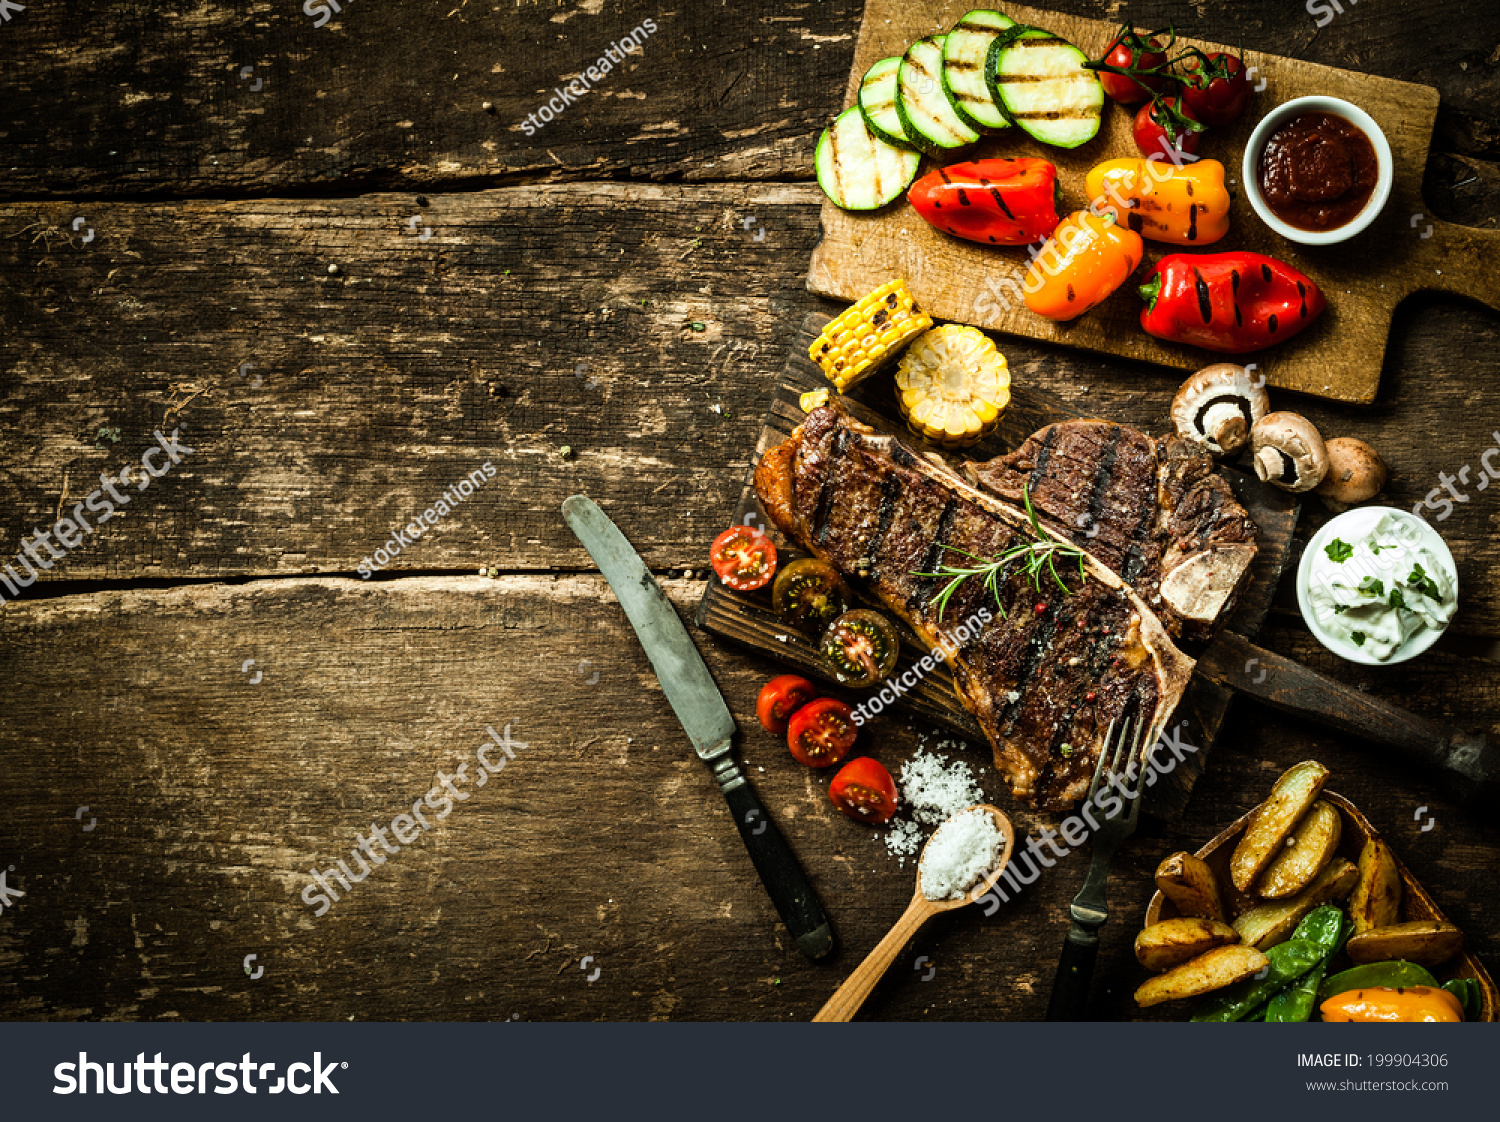 Overhead view of colorful roast vegetables, savory sauces and salt served with grilled t-bone steak on a rustic wooden counter in a country steakhouse #199904306